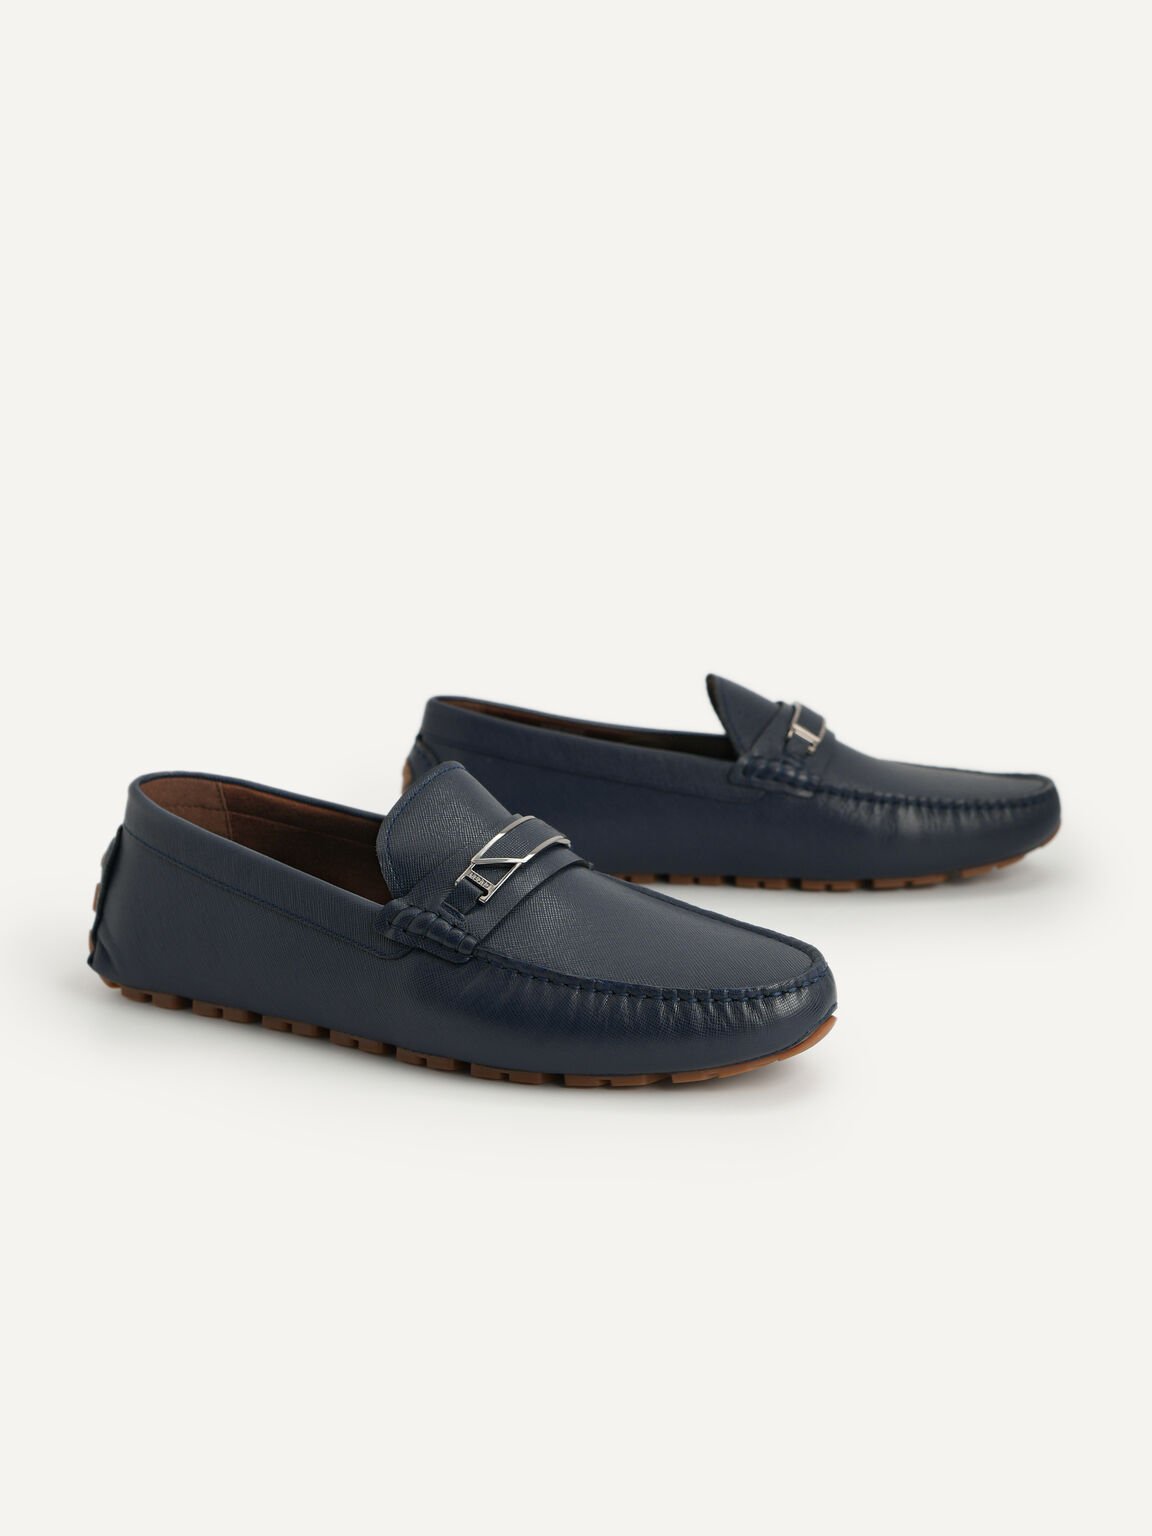 Leather Moccasins with Metal Bit, Navy, hi-res